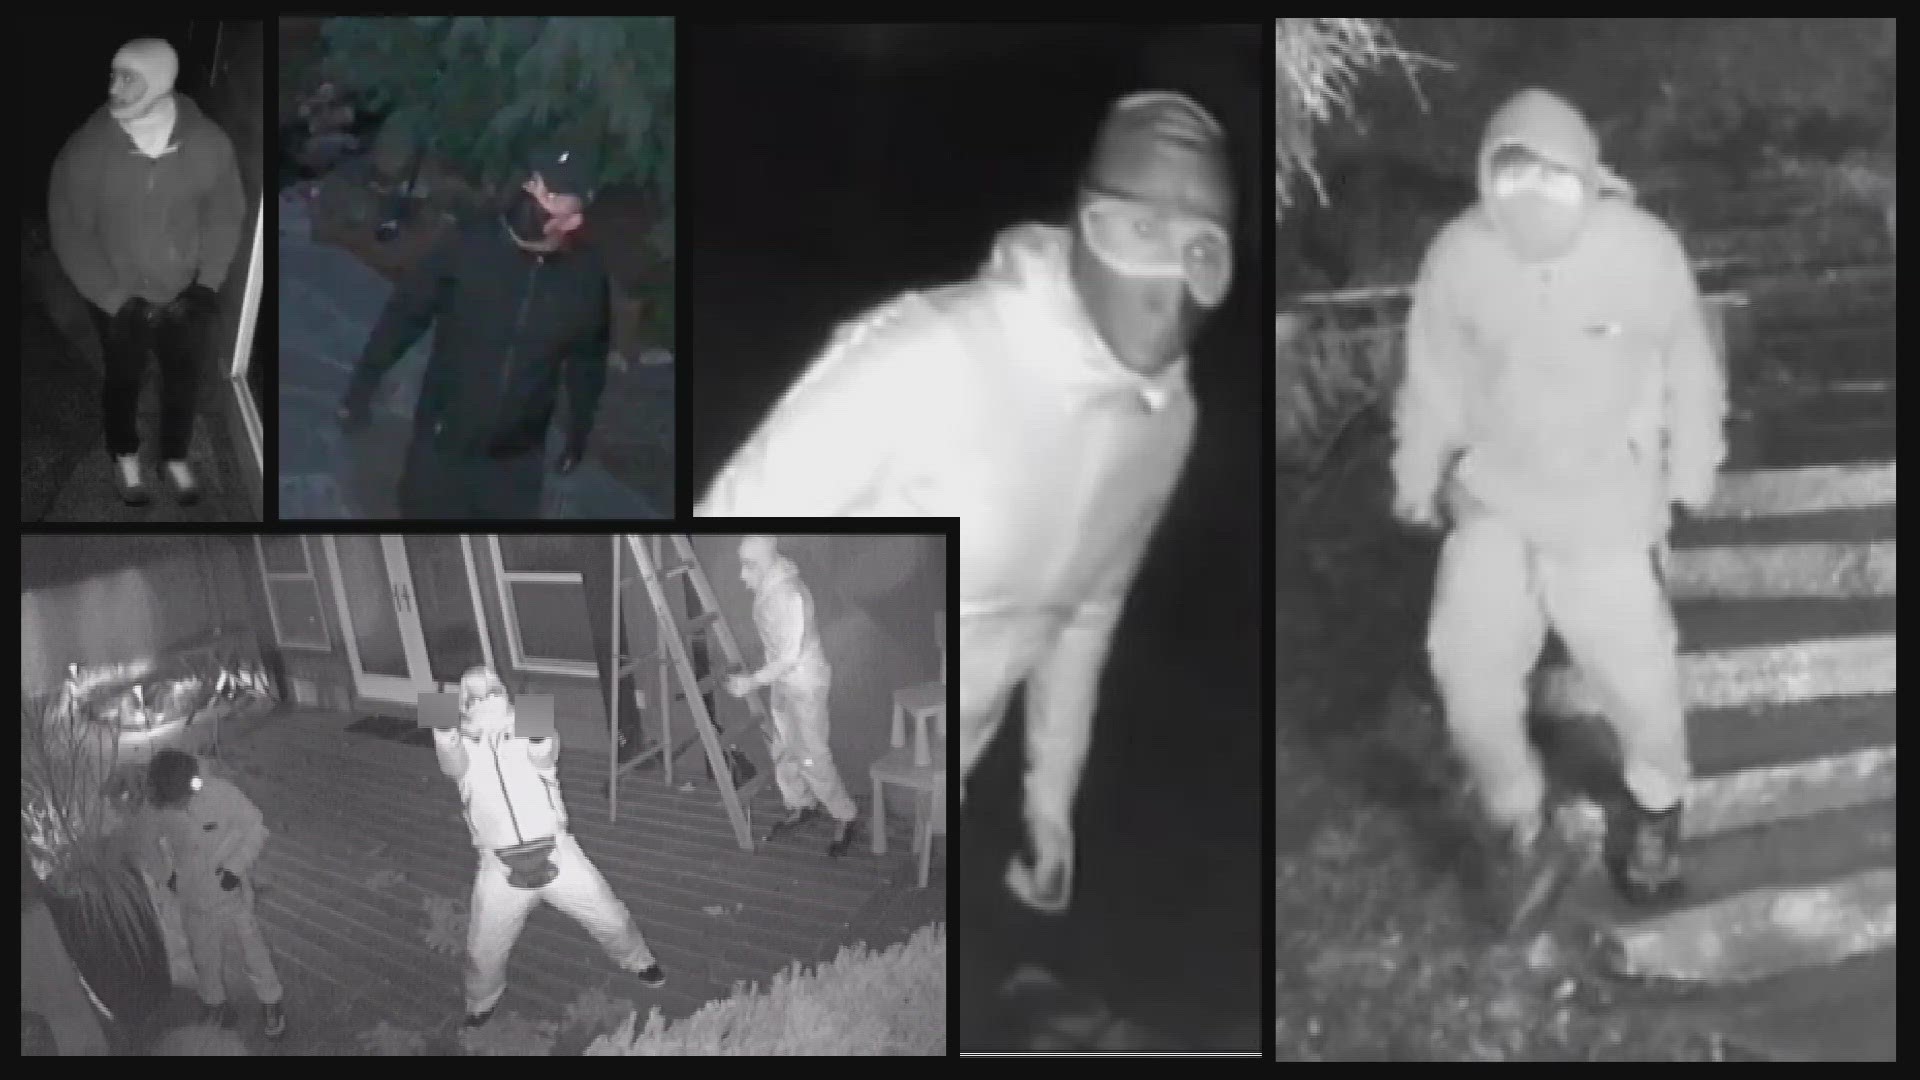 Police believe the burglaries are being committed by the same group of people. They usually target homes from Thursdays through Sundays between 5 and 9 p.m.